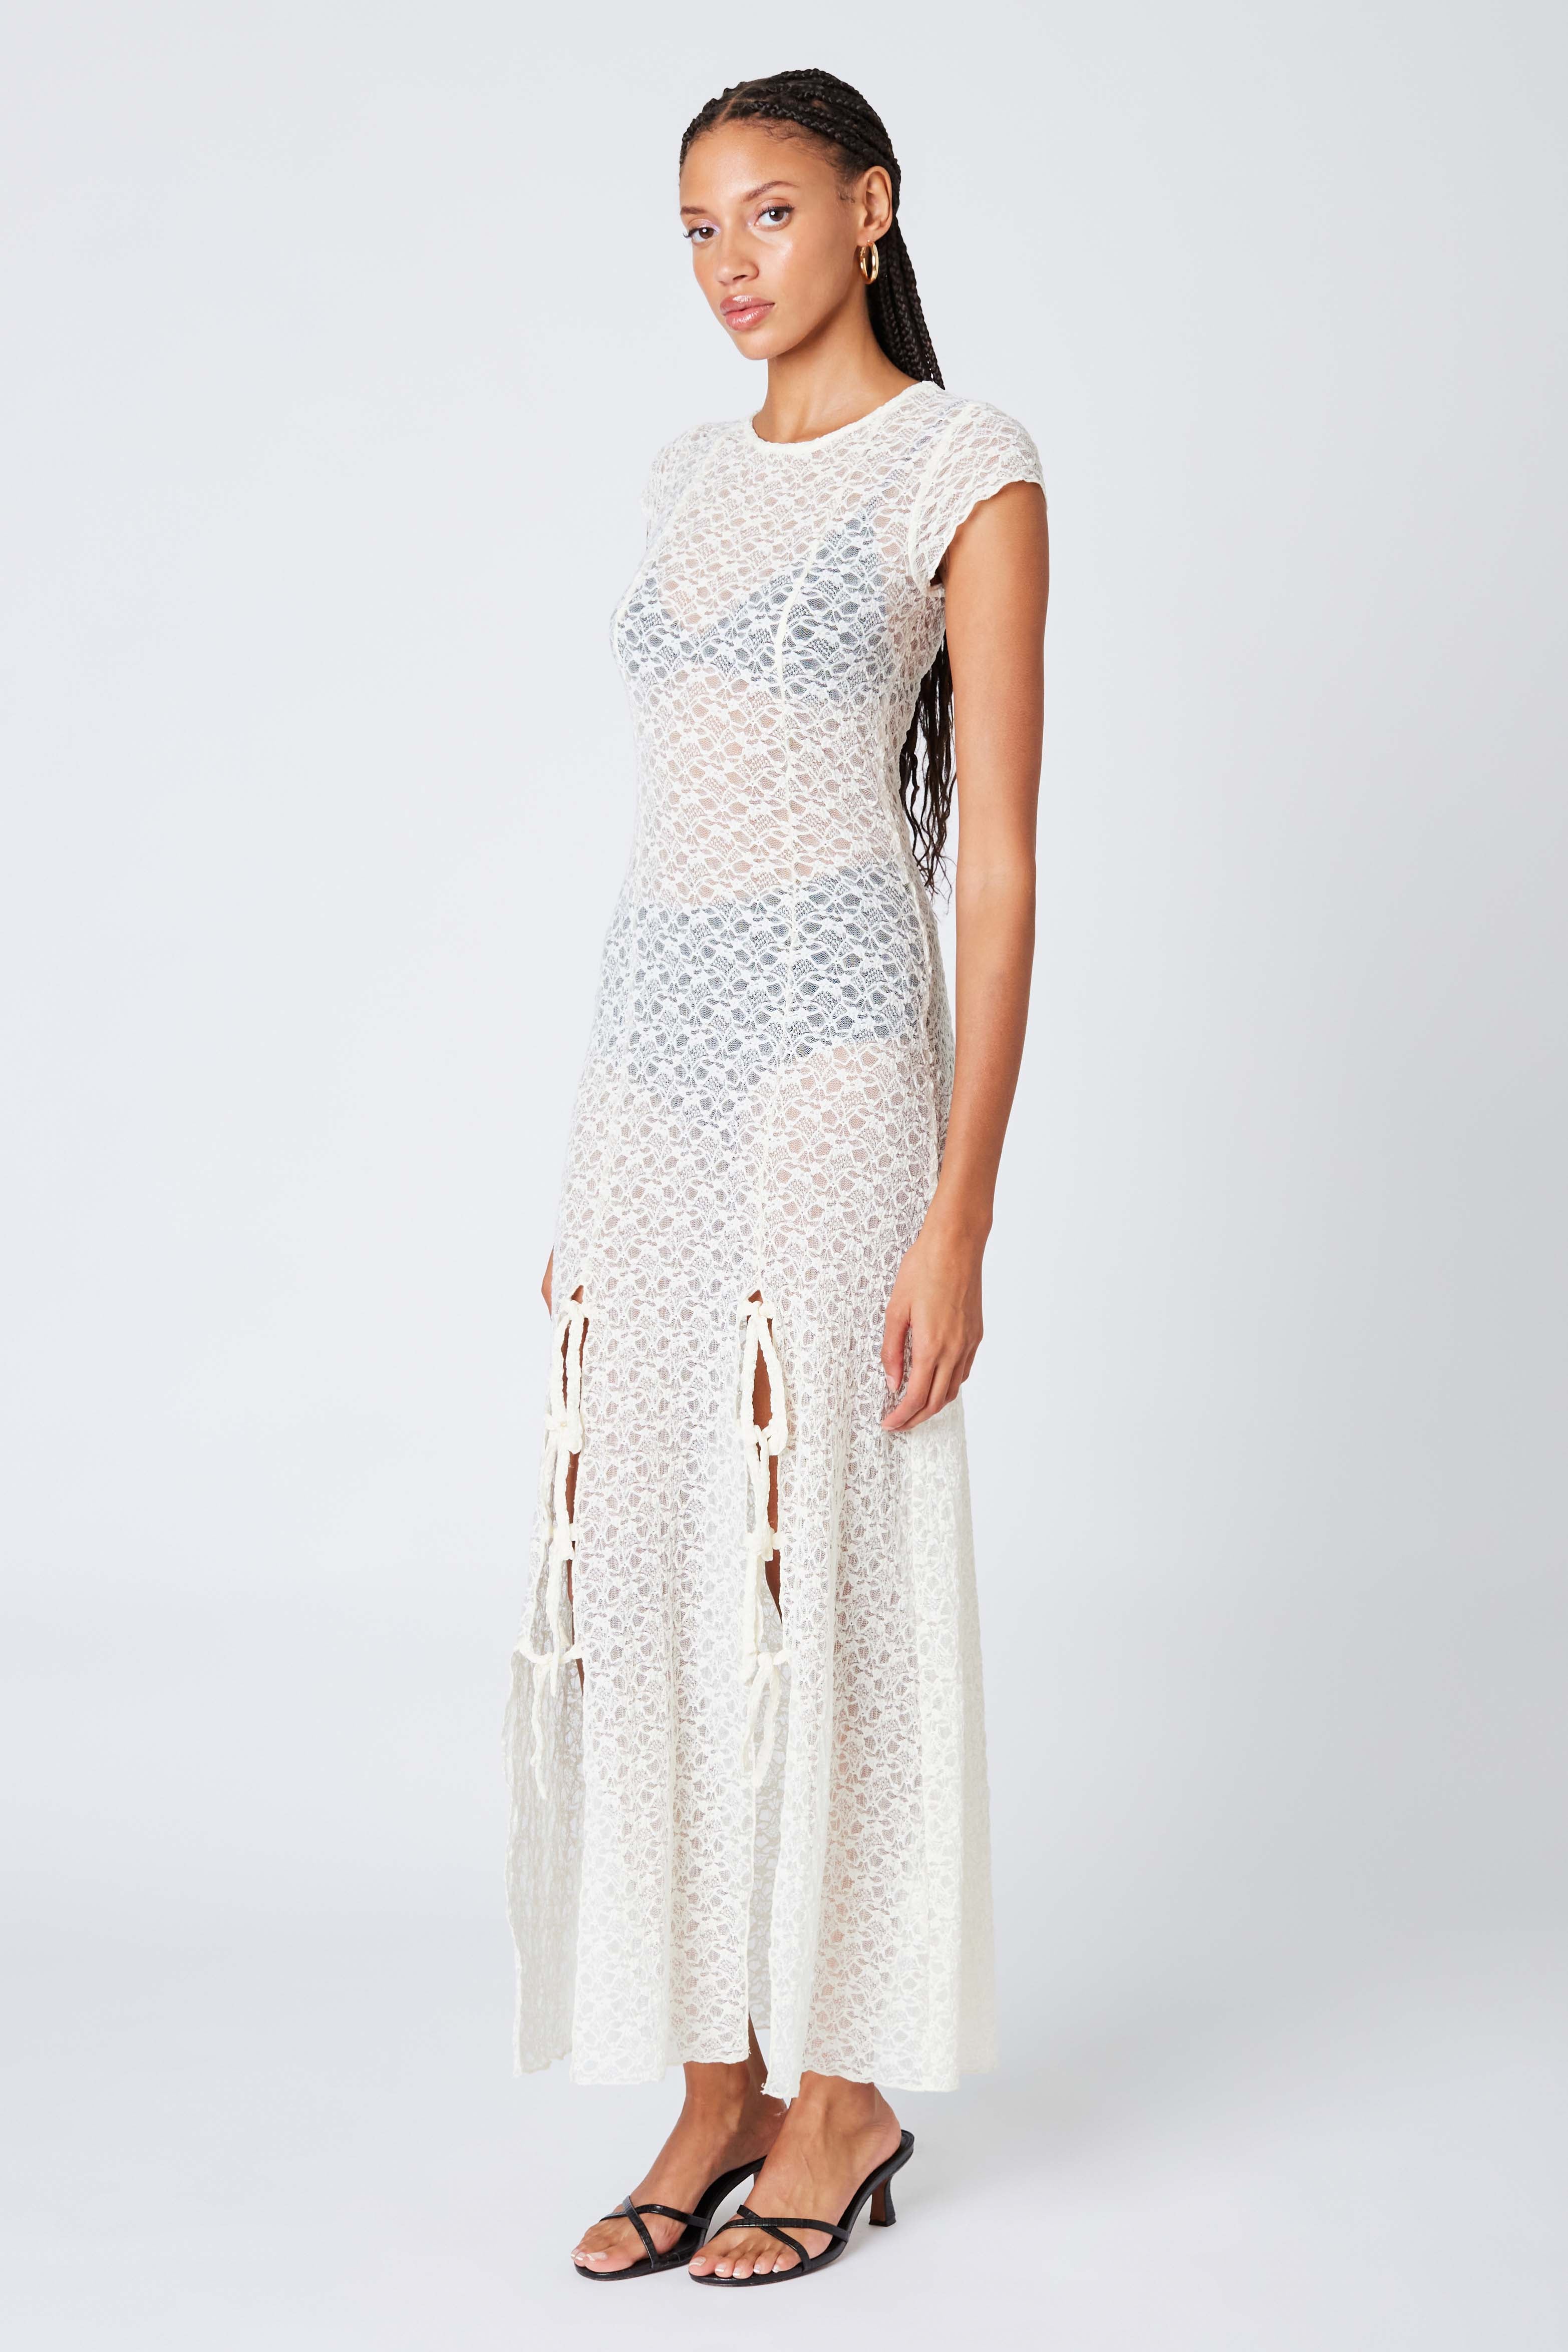 Short Sleeve Lace Maxi Dress in Ivory Side View